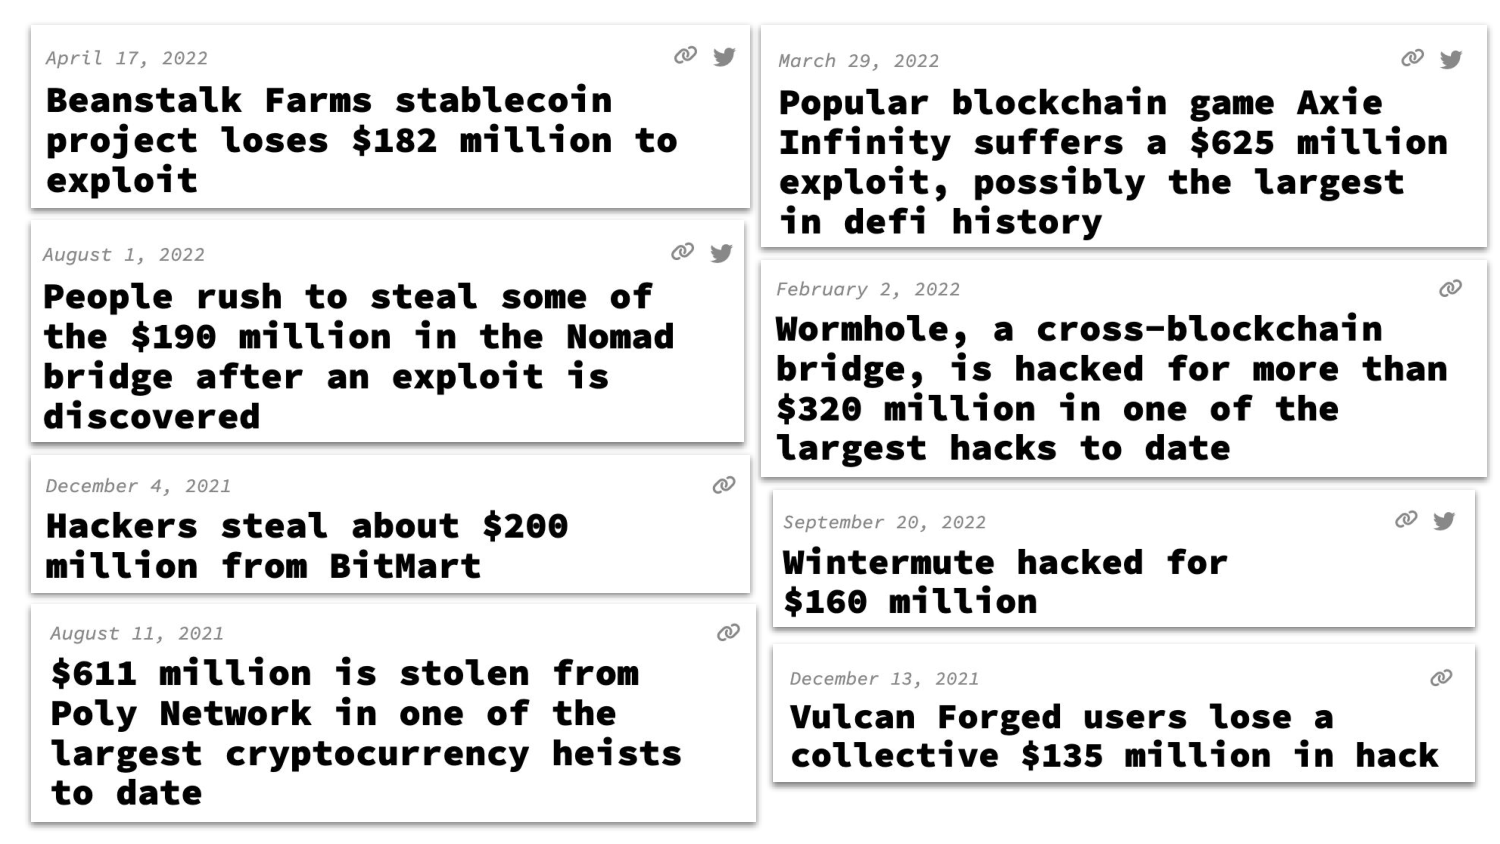 Collage of headlines from Web3 Is Going Just Great: 'Beanstalk Farms stablecoin project loses $182 million to exploit'. 'People rush to steal some of the $190 million in the Nomad bridge after an exploit is discovered'. 'Hackers steal about $200 million from BitMart'. '$611 million is stolen from Poly Network in one of the largest cryptocurrency heists to date'. 'Popular blockchain game Axie Infinity suffers a $625 million exploit, possibly the largest in defi history'. 'Wormhole, a cross-blockchain bridge, is hacked for more than $320 million in one of the largest hacks to date'. 'Wintermute hacked for $160 million'. 'Vulcan Forged users lose a collective $135 million in hack'.